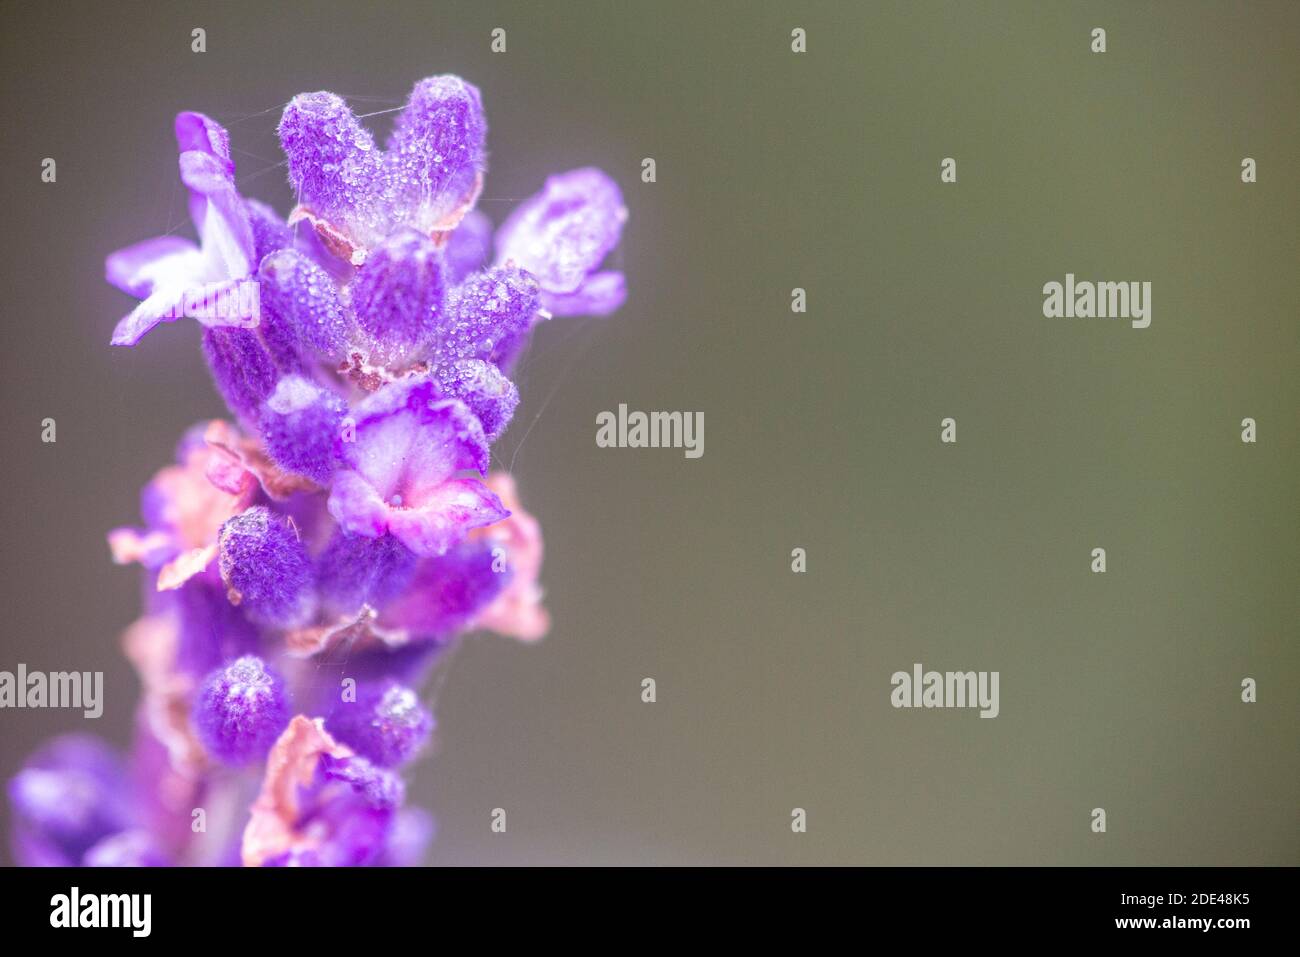 A macro photograph of a lavender flower Stock Photo